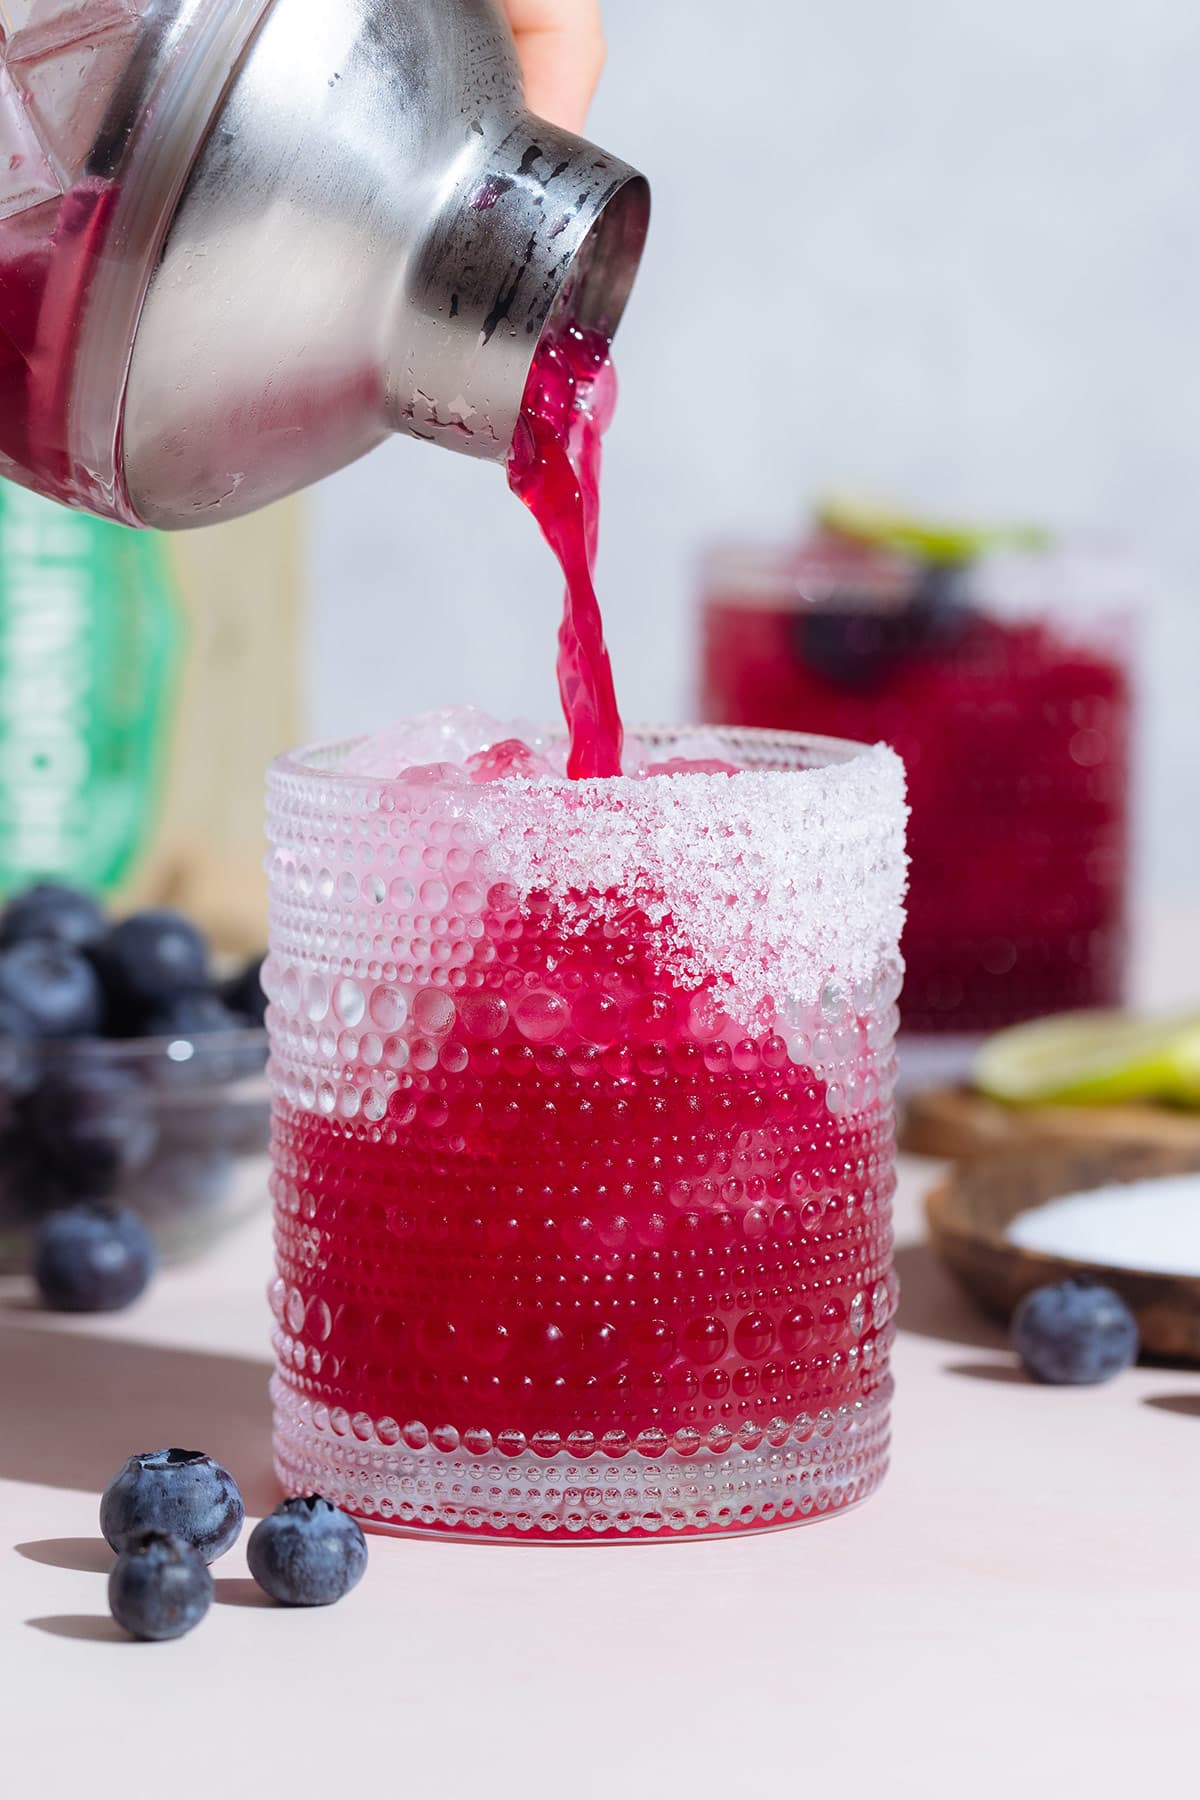 Bright pink purple margarita being poured into a short glass from a glass cocktail shaker.